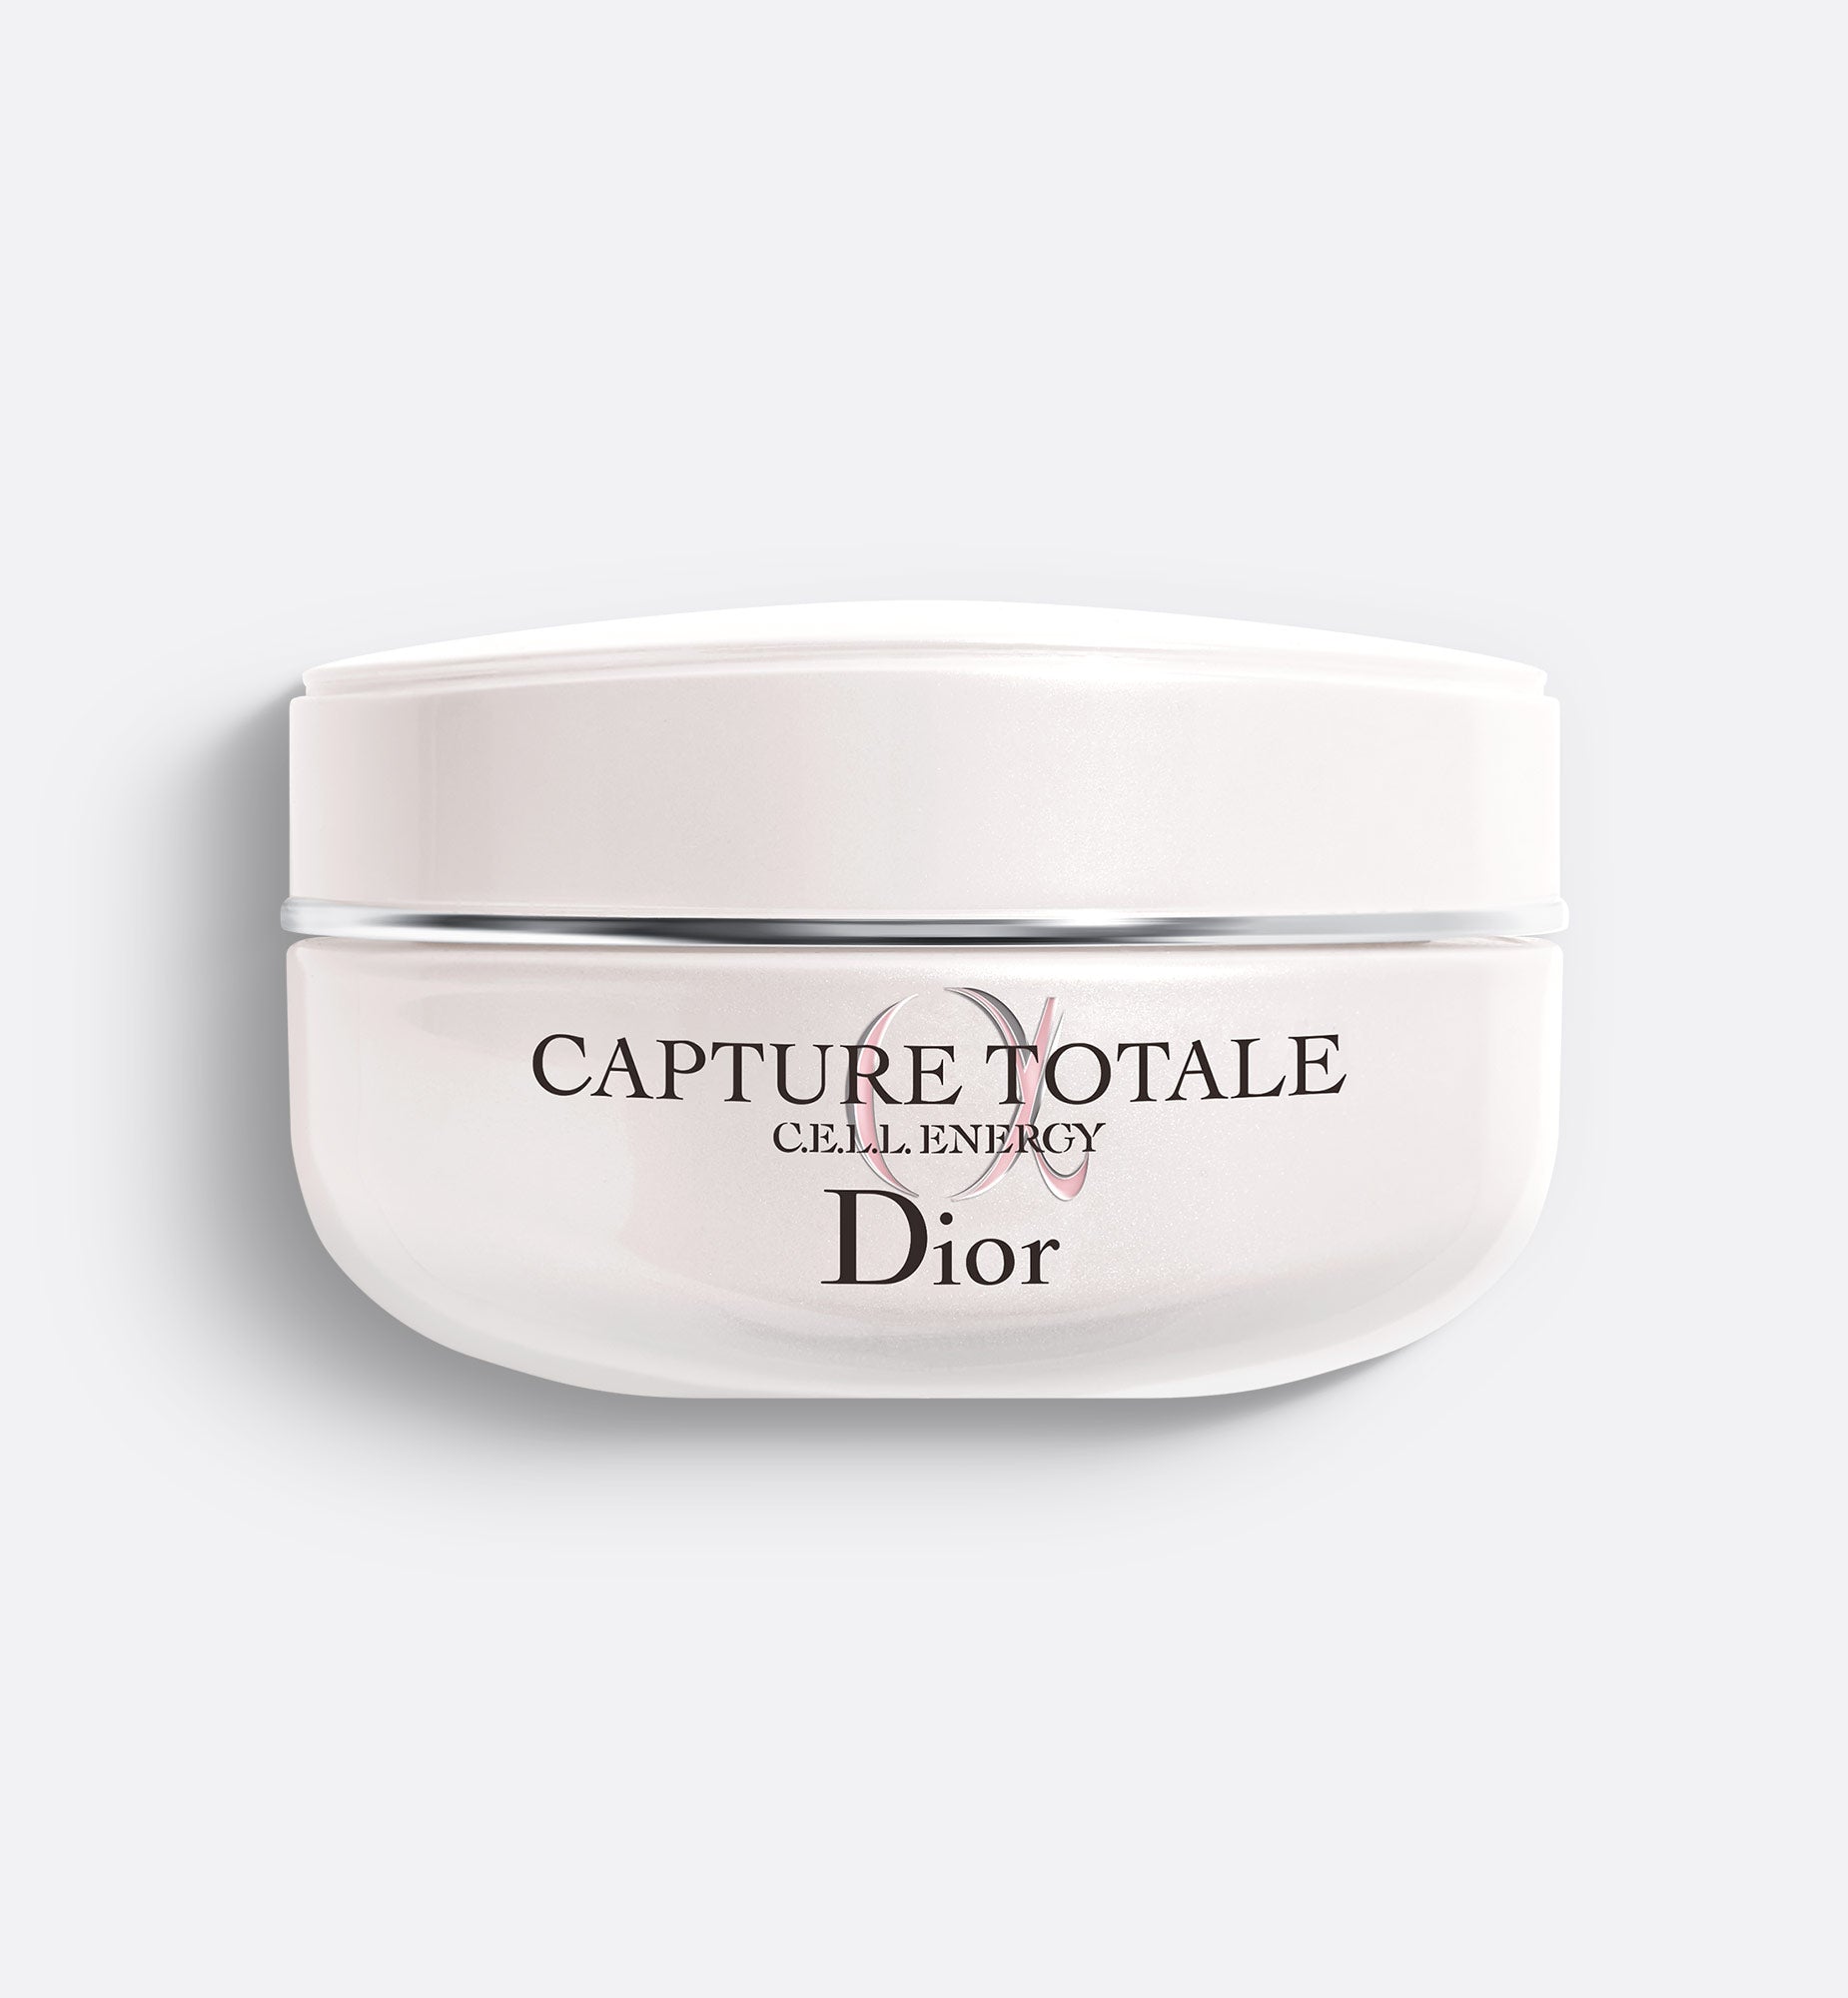 CAPTURE TOTALE | Firming & wrinkle-correcting creme